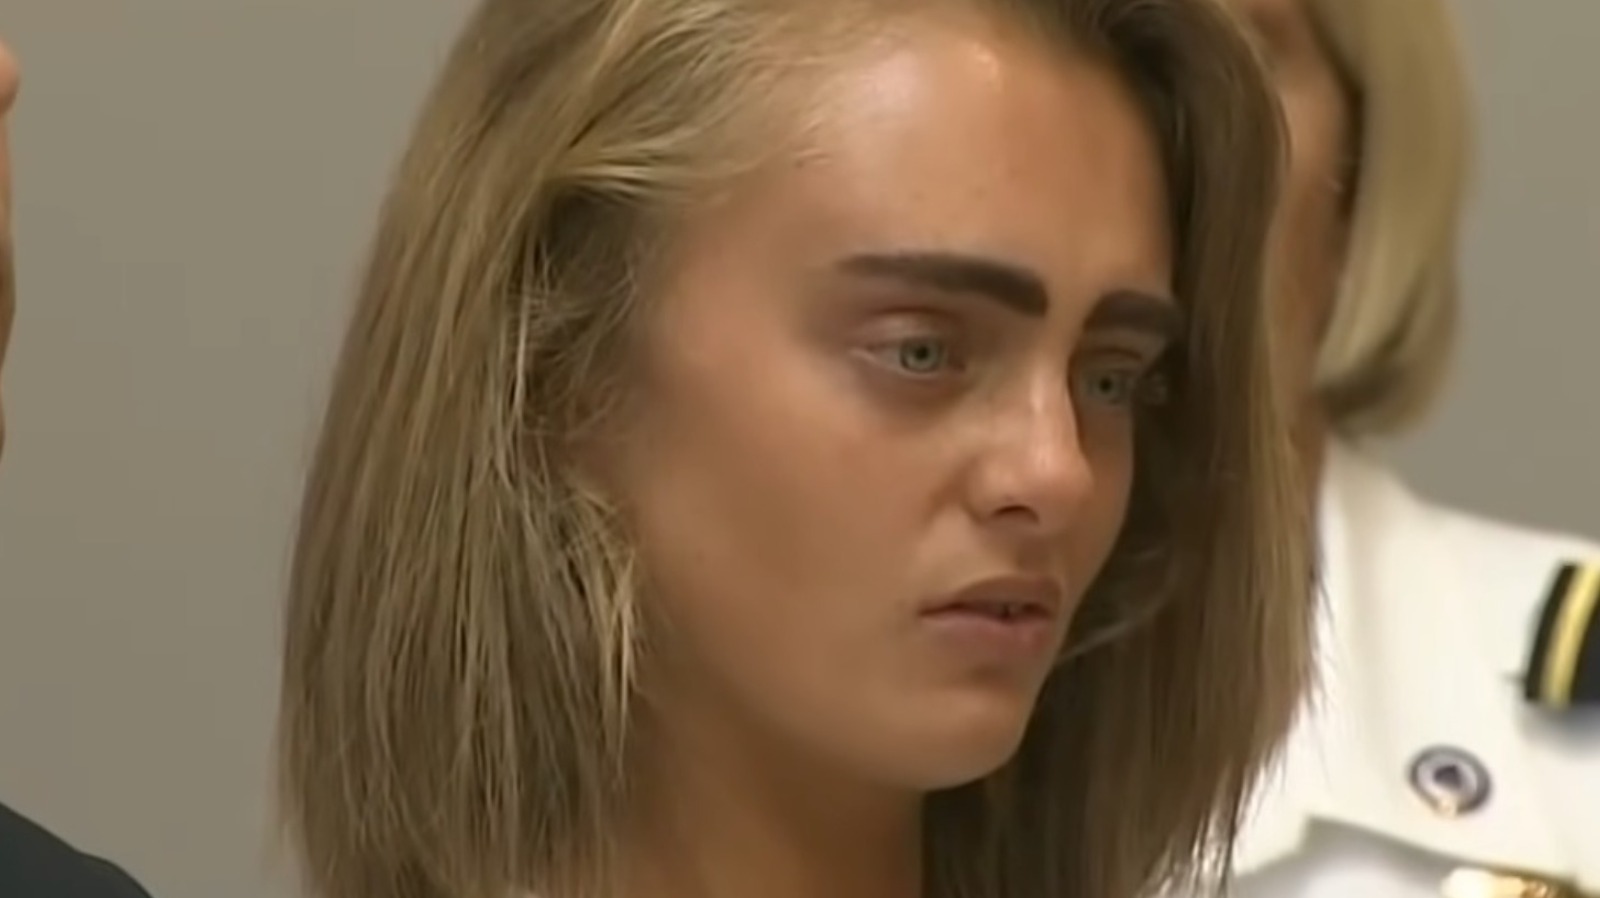 Where Is Michelle Carter Now?